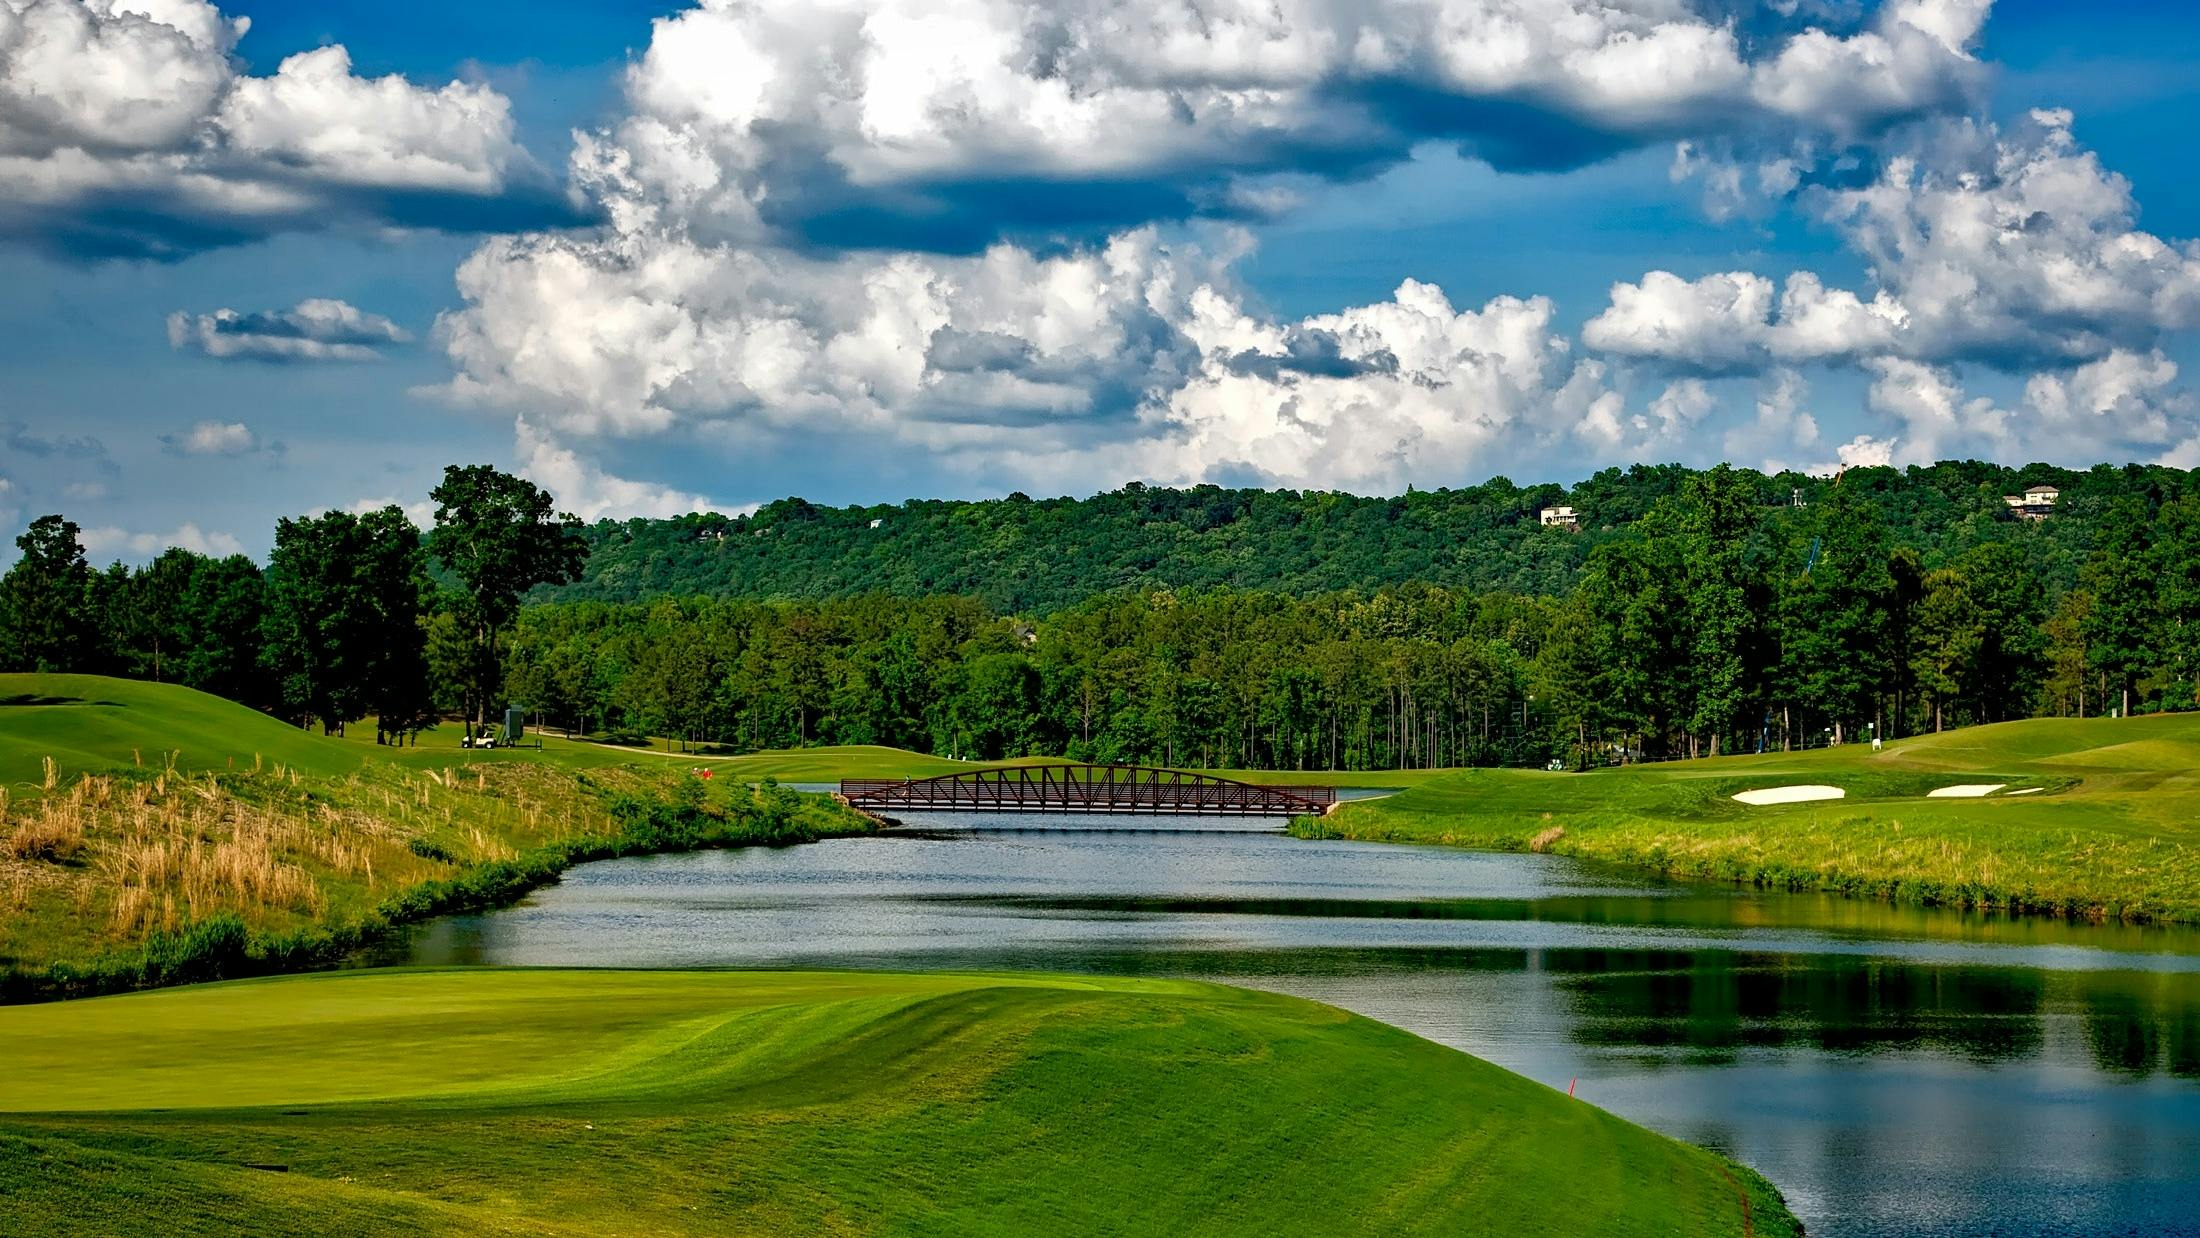 A landscape image of a beautiful golf course with a wooden bridge crossing its water feature. 